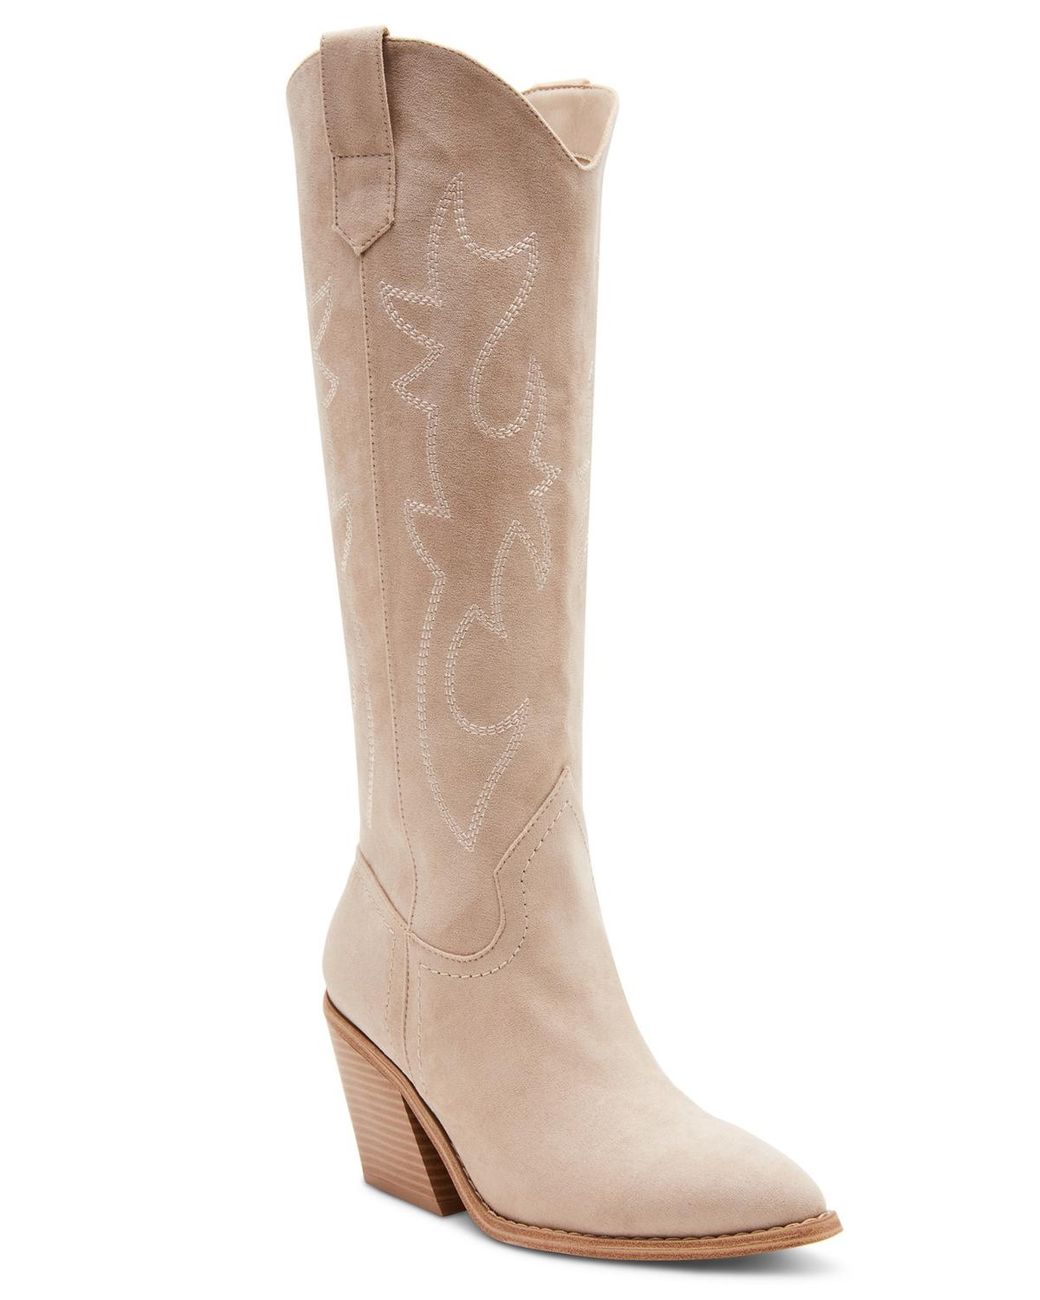 Madden Girl Arizona Knee High Cowboy Boots in Natural | Lyst